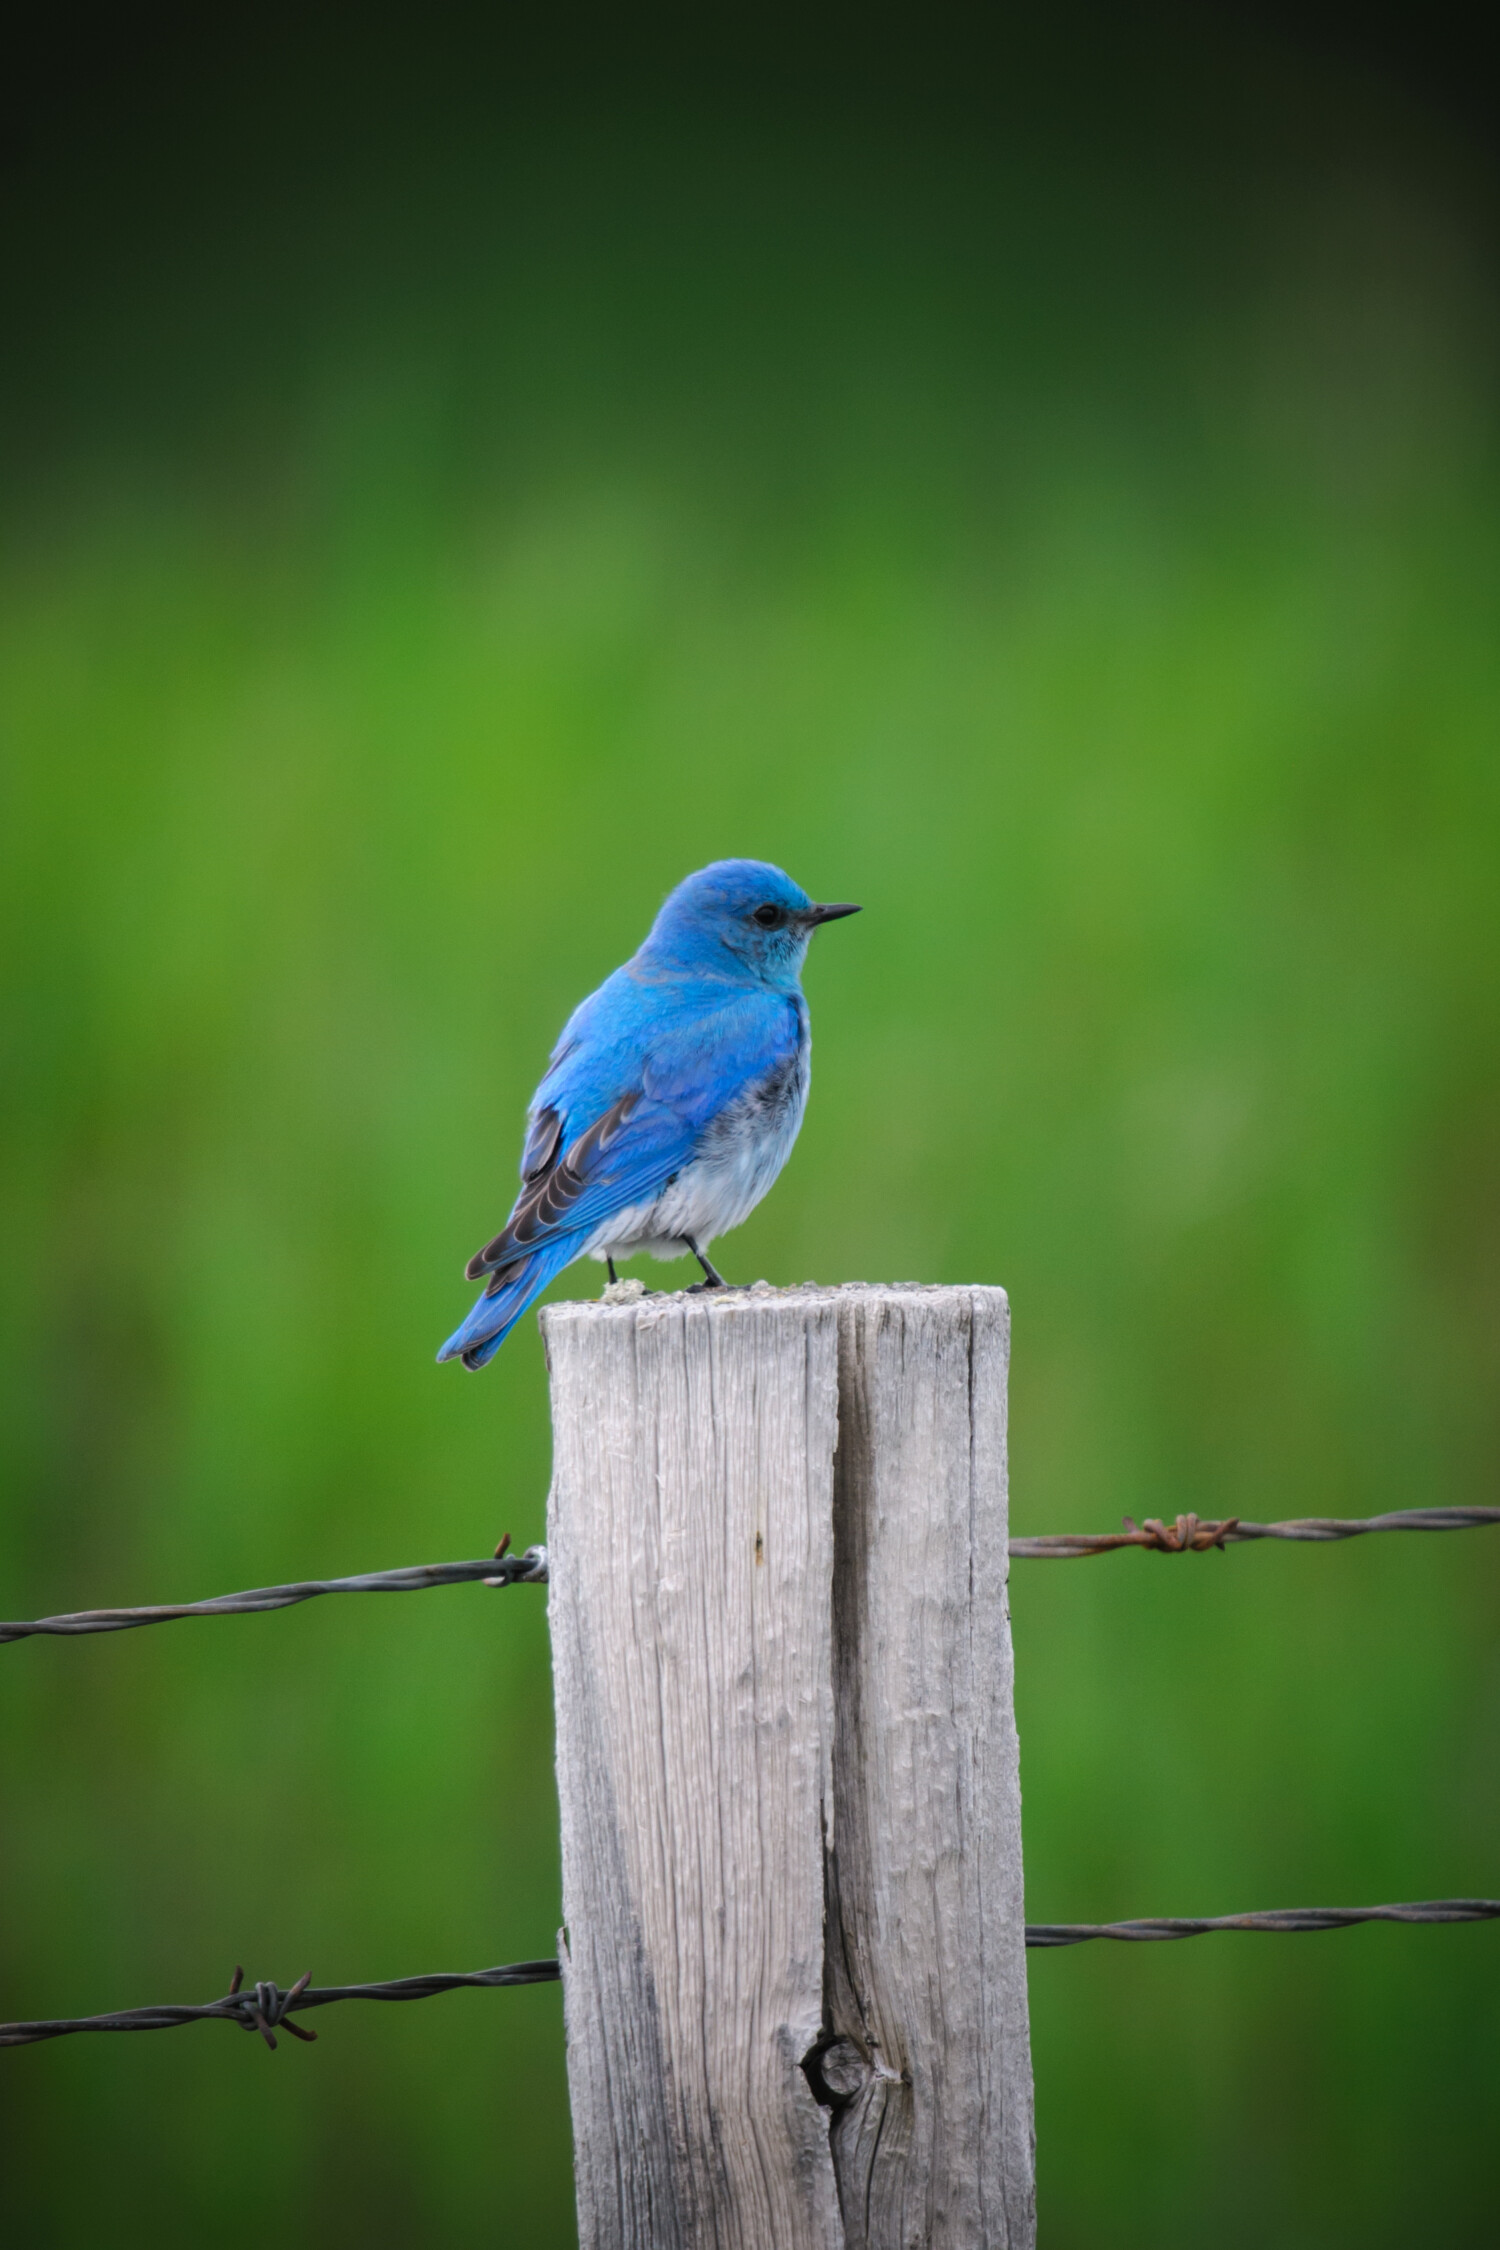 Mountain bluebird sits on fence post